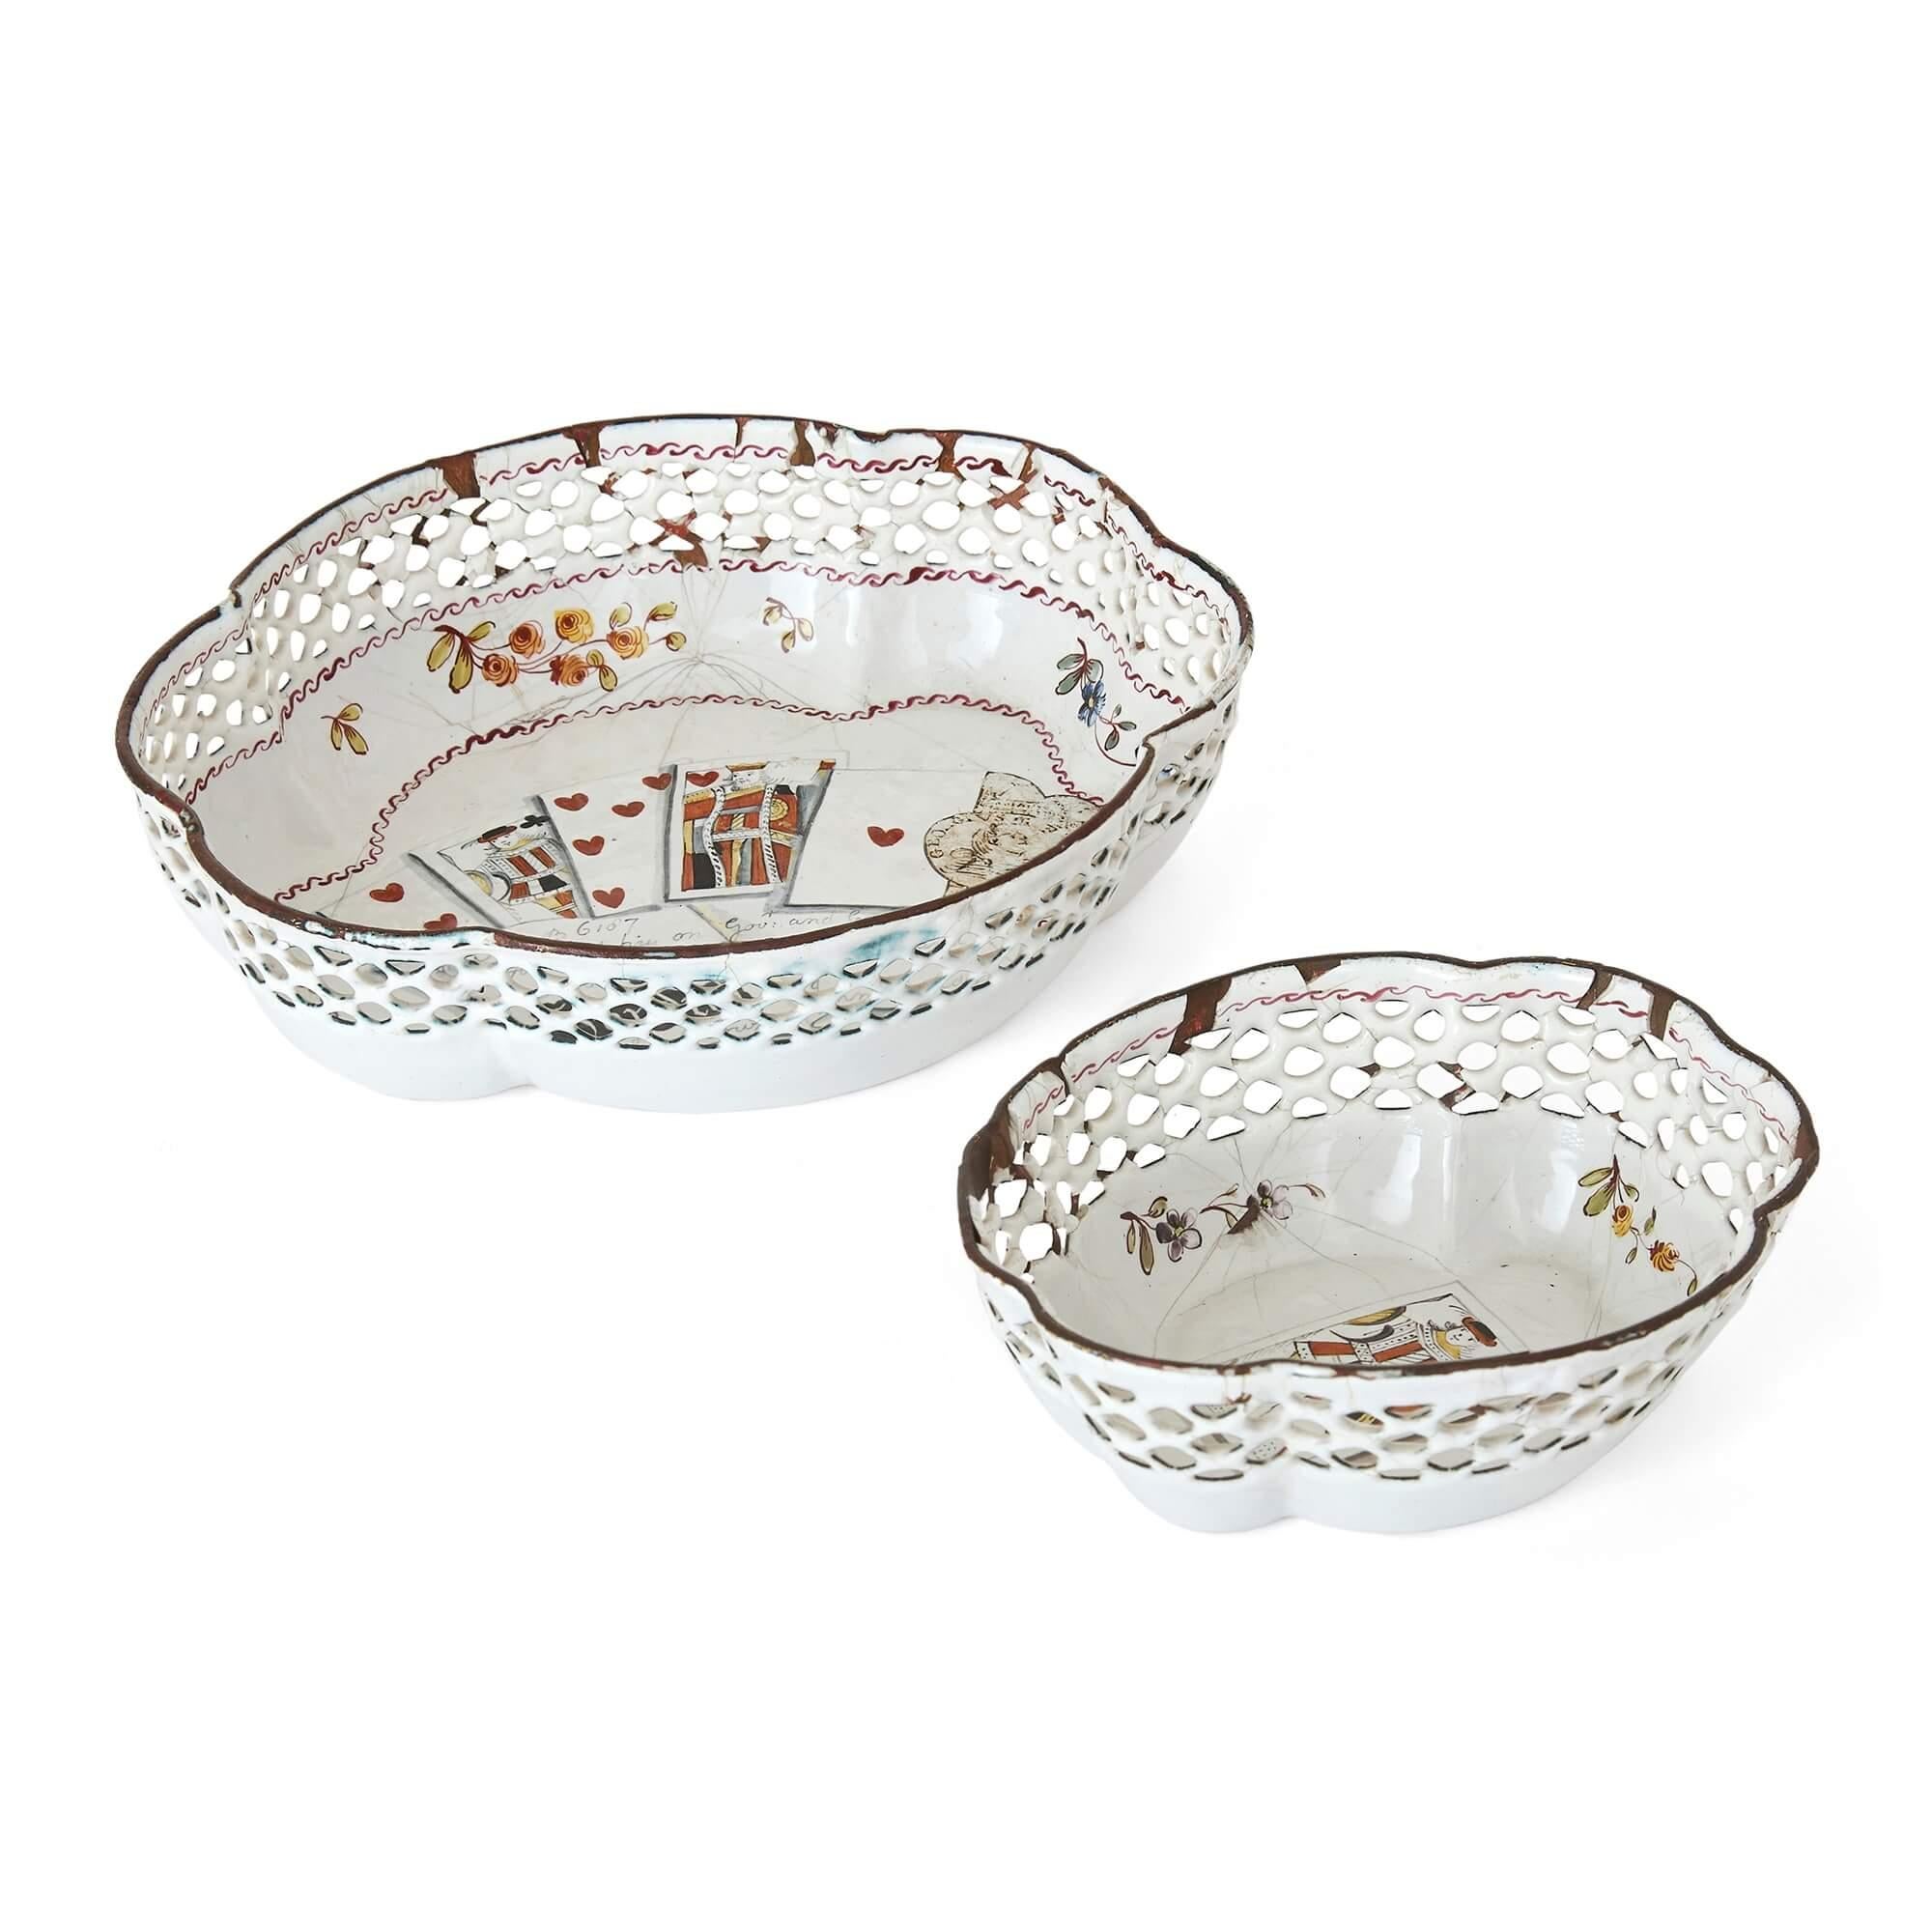 Pair of Antique Enamelled Staffordshire English Dishes with Playing ...